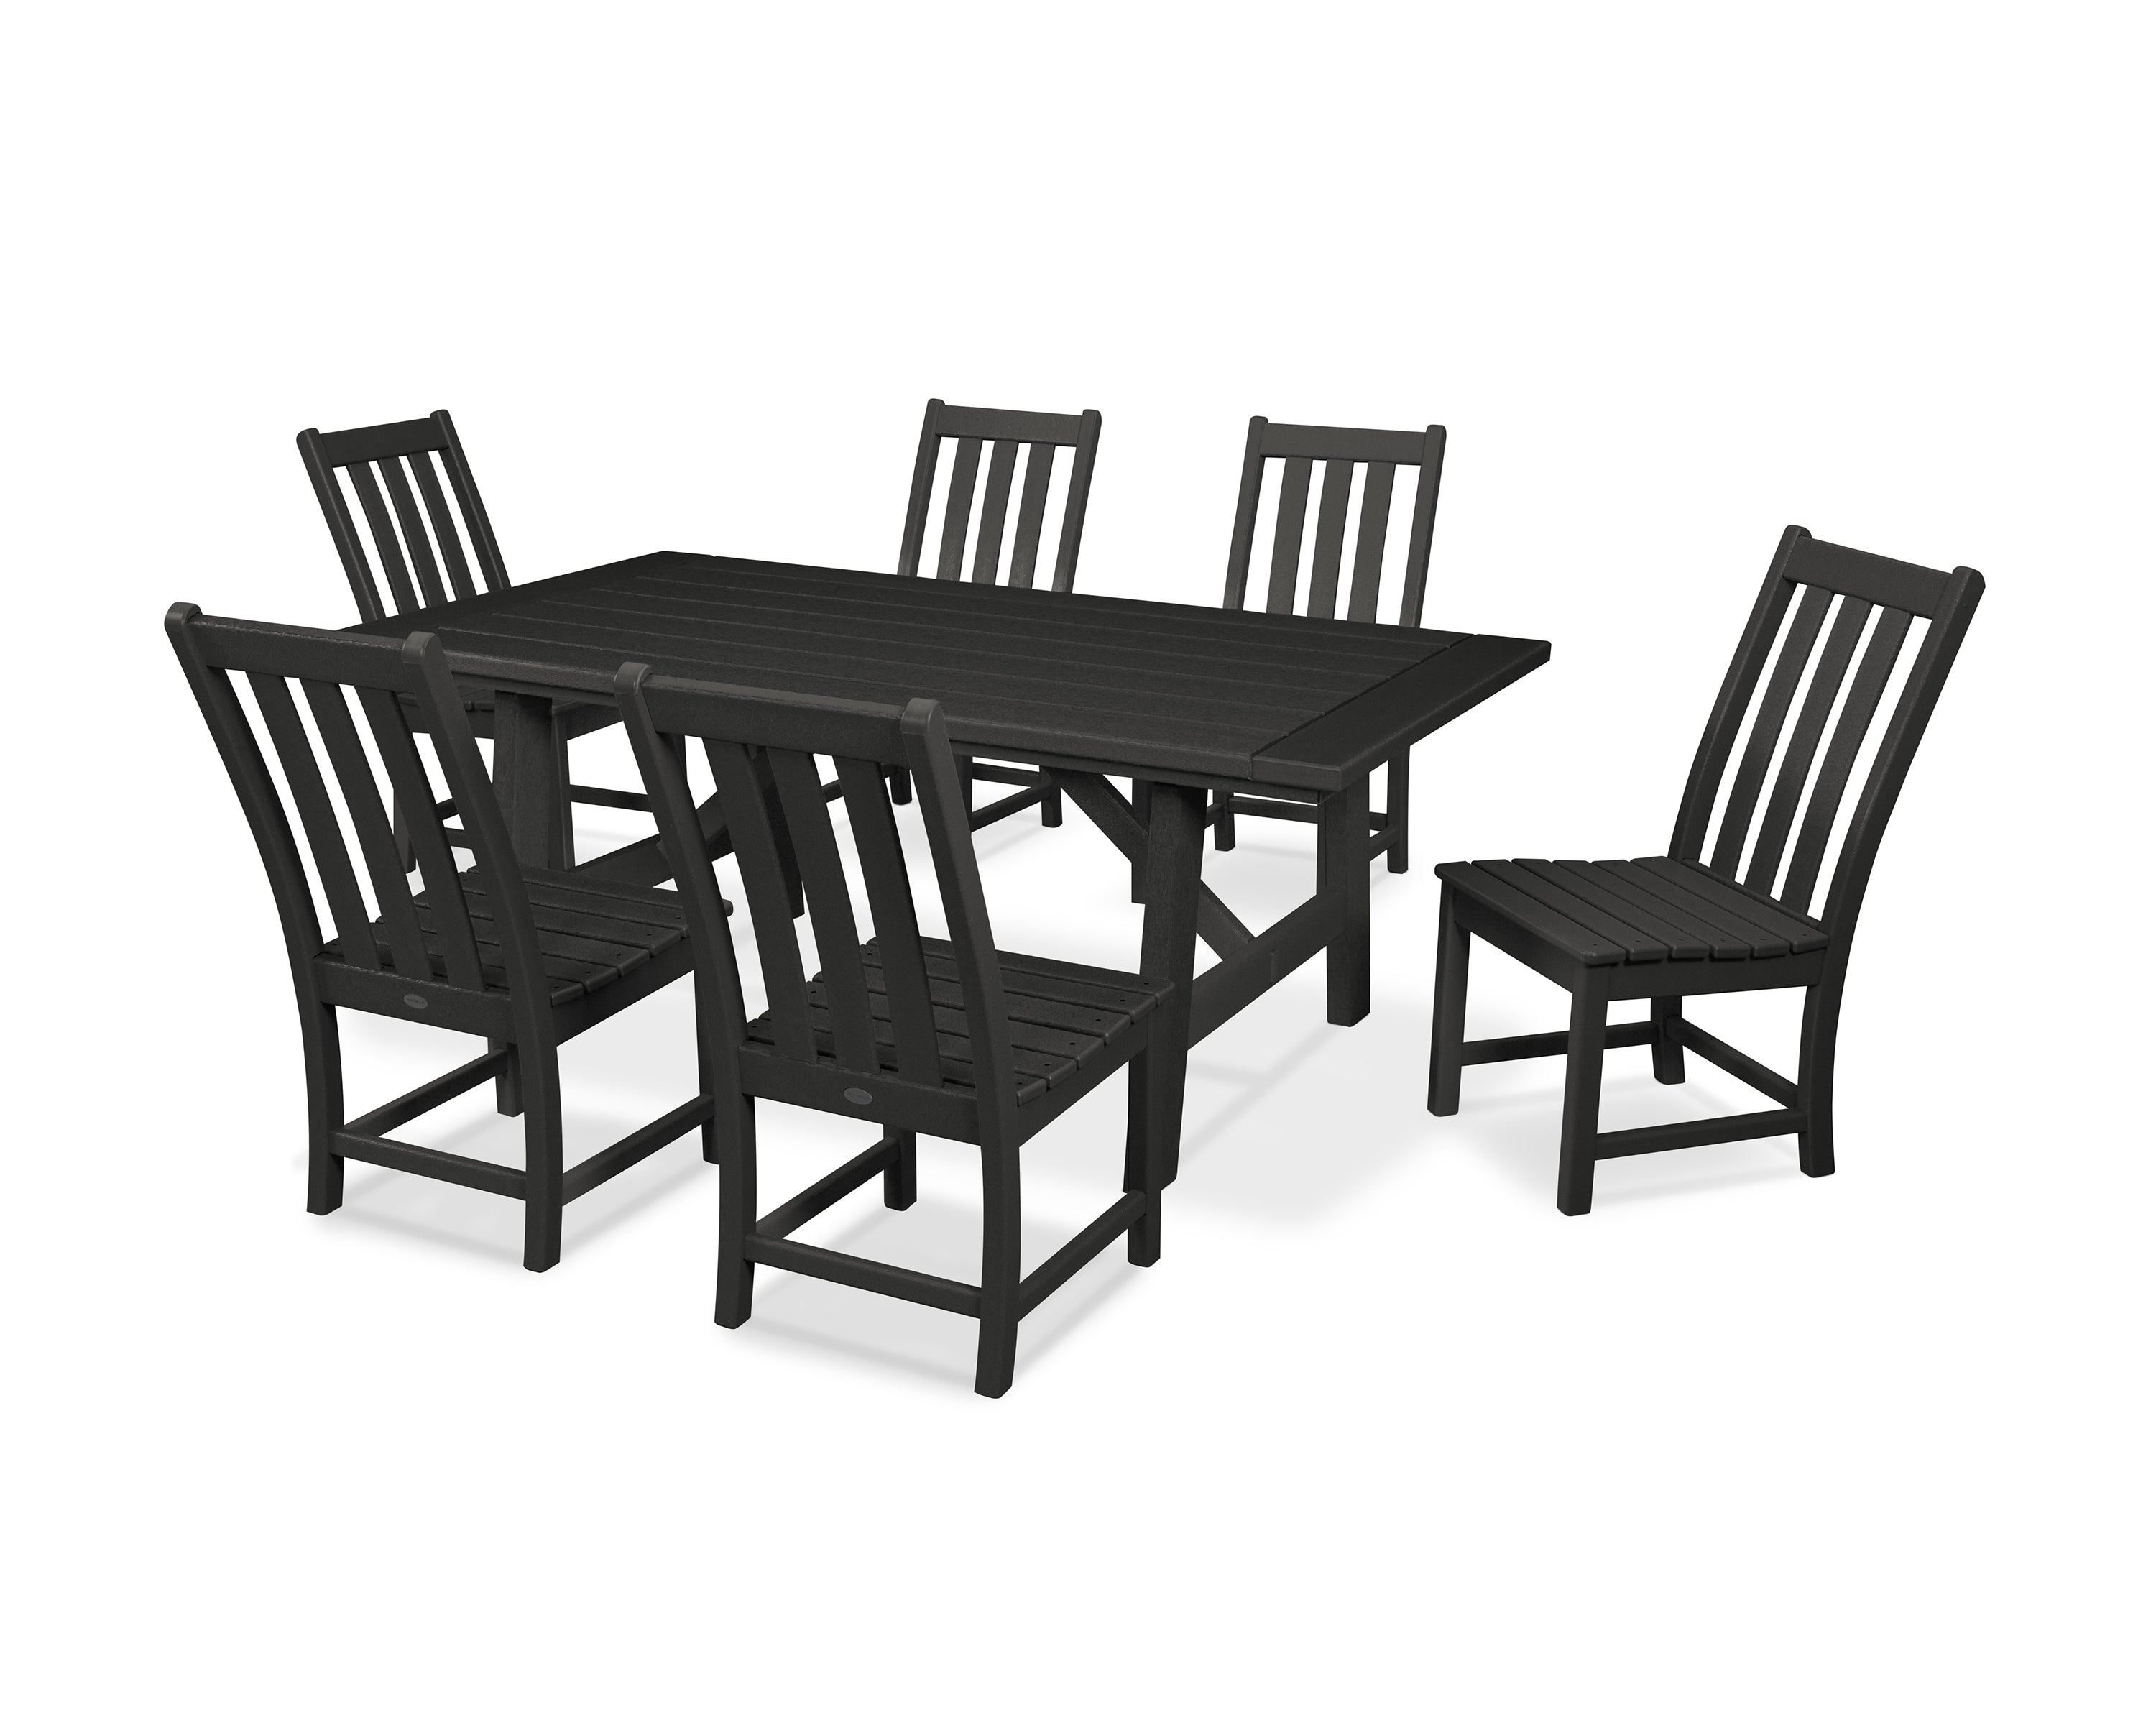 POLYWOOD® Vineyard 7-Piece Rustic Farmhouse Side Chair Dining Set in Black